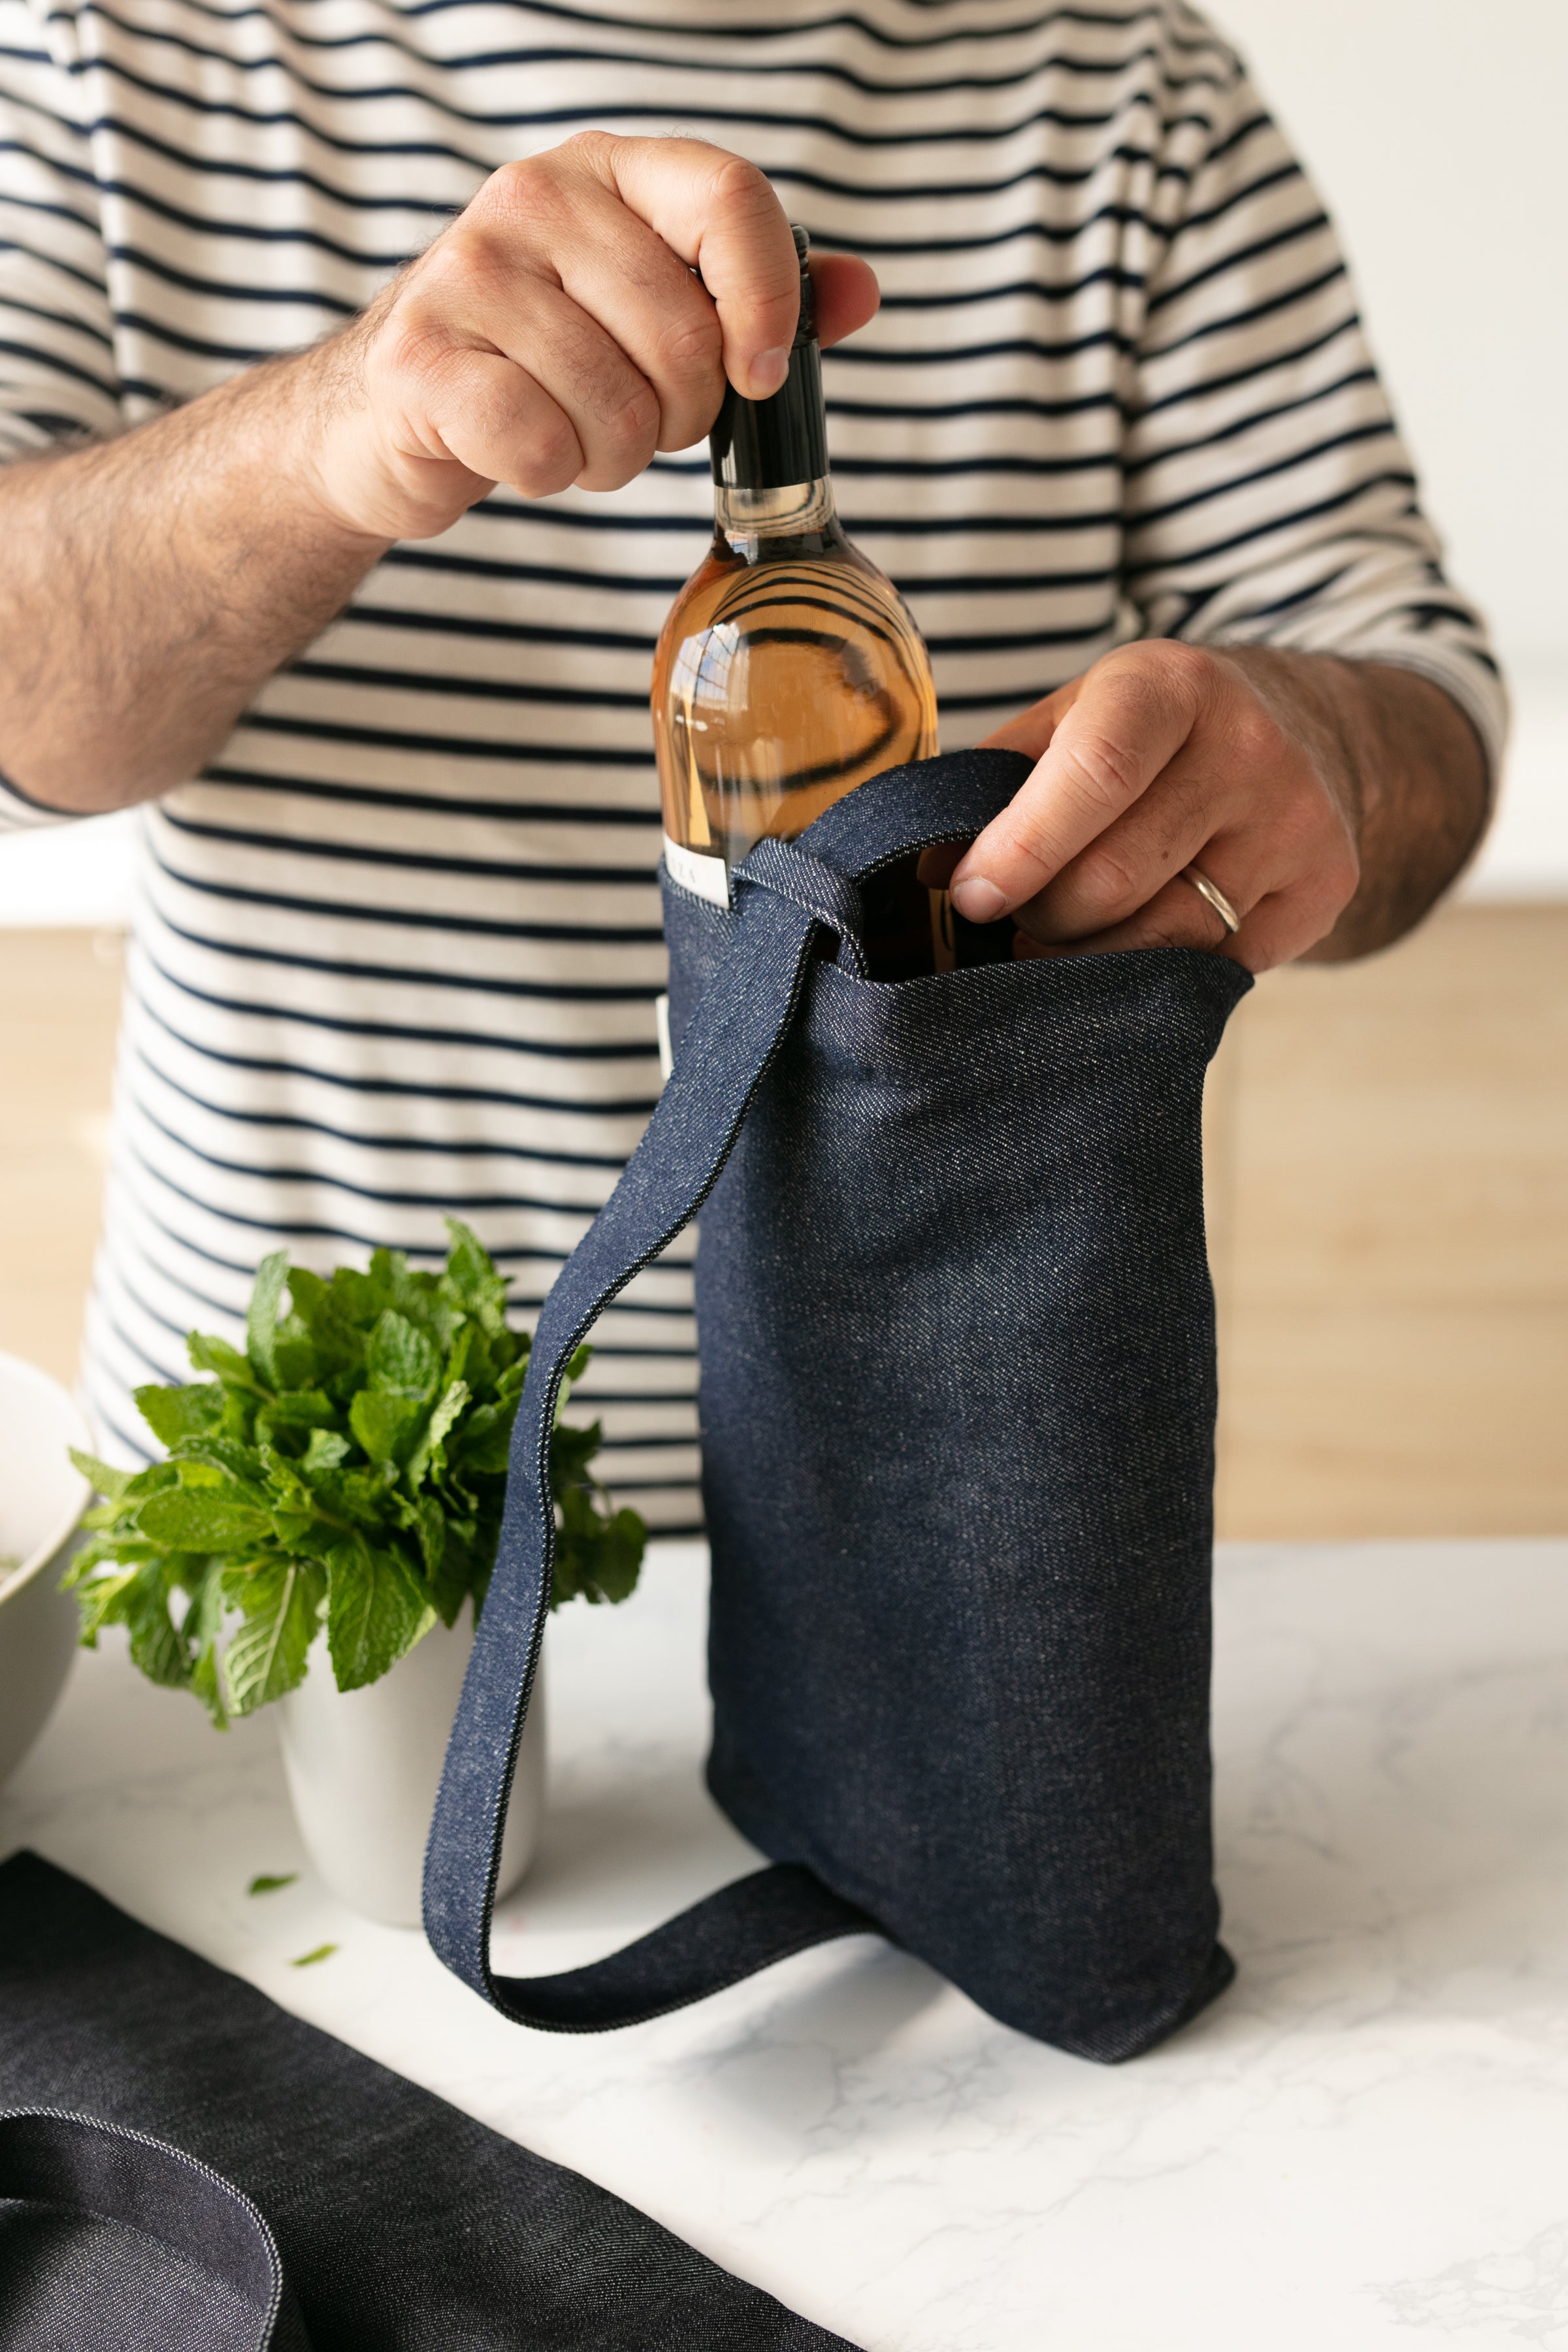 Baggy Winecoat, A Portable Bag-In-Box Wine Purse